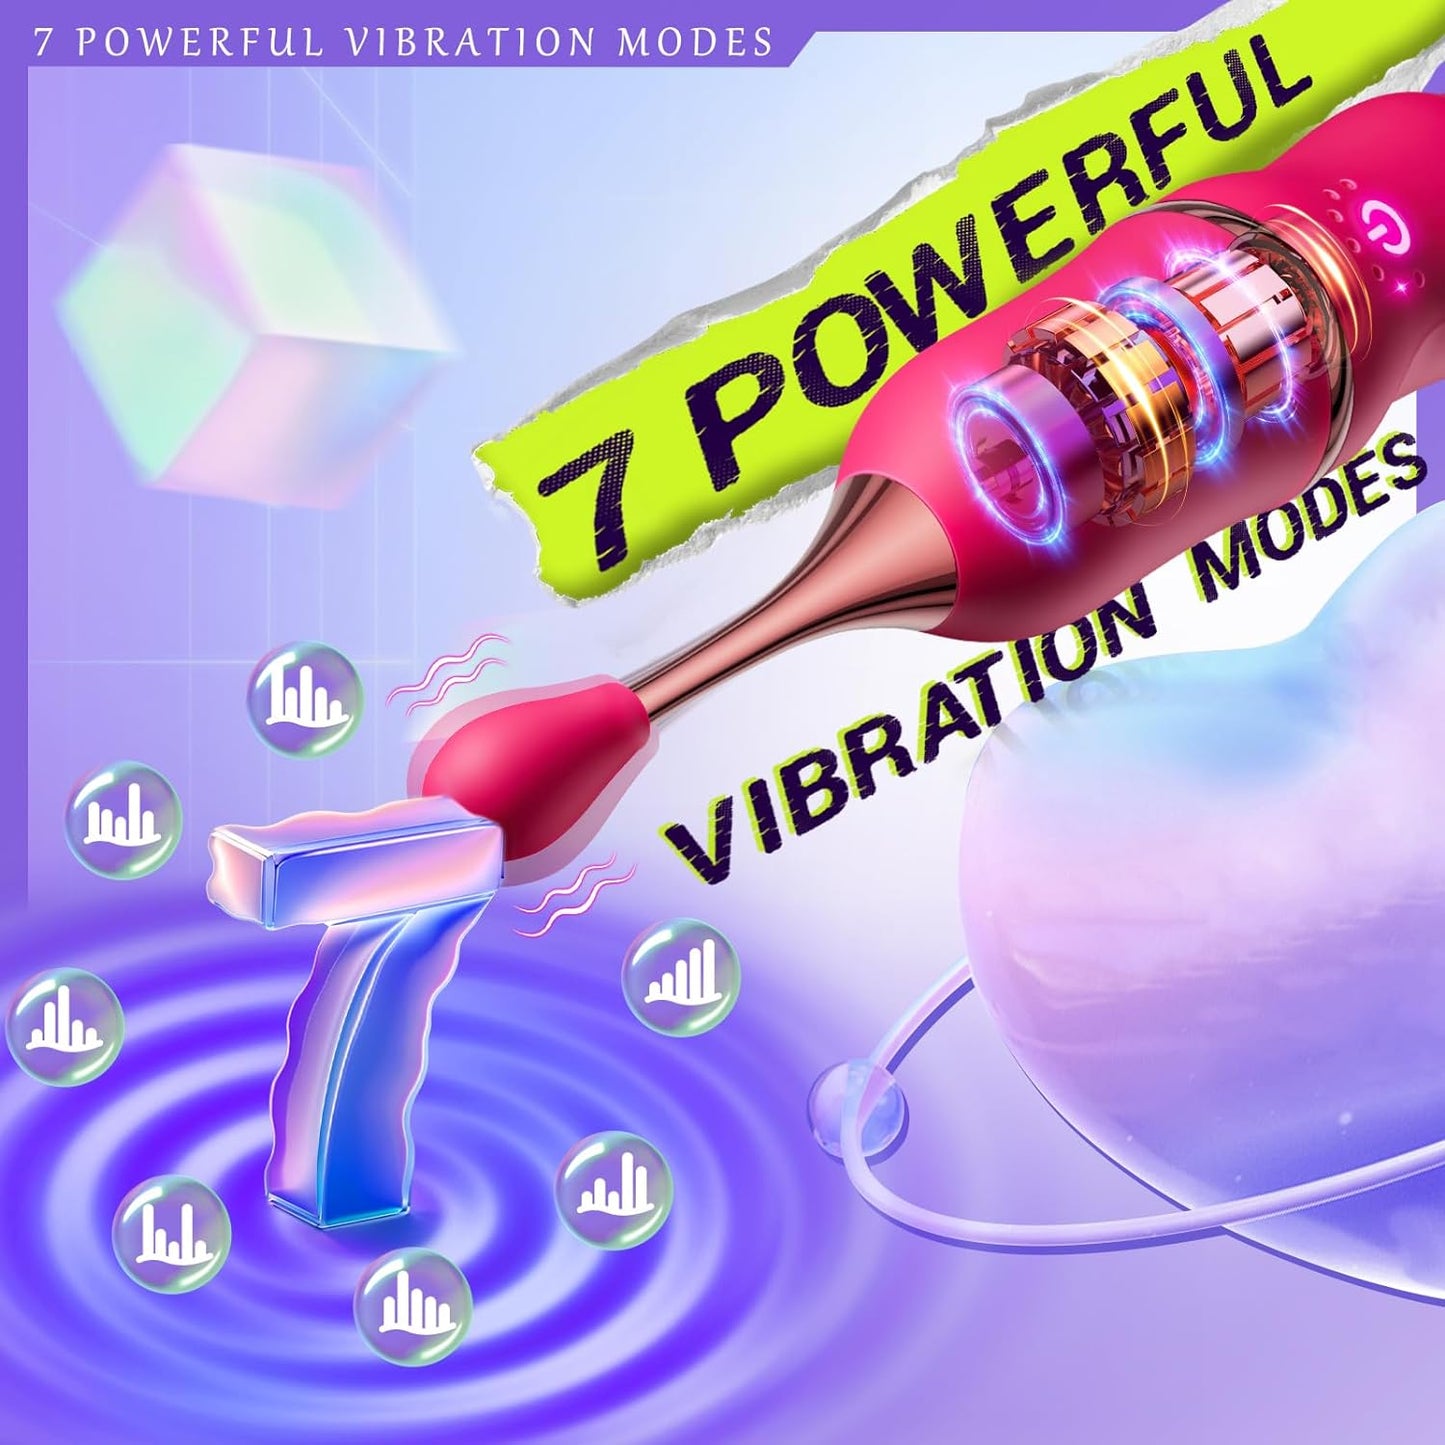 Clitoral Female Vibrators Sex Toy - 3 in 1 Vibrator Wand Silicone Heads with 7 Quiet Vibration Modes Precision Targeted for Dildo Nipple Anal G Spot Vibrator,Adult Sex Toys for Women Couples